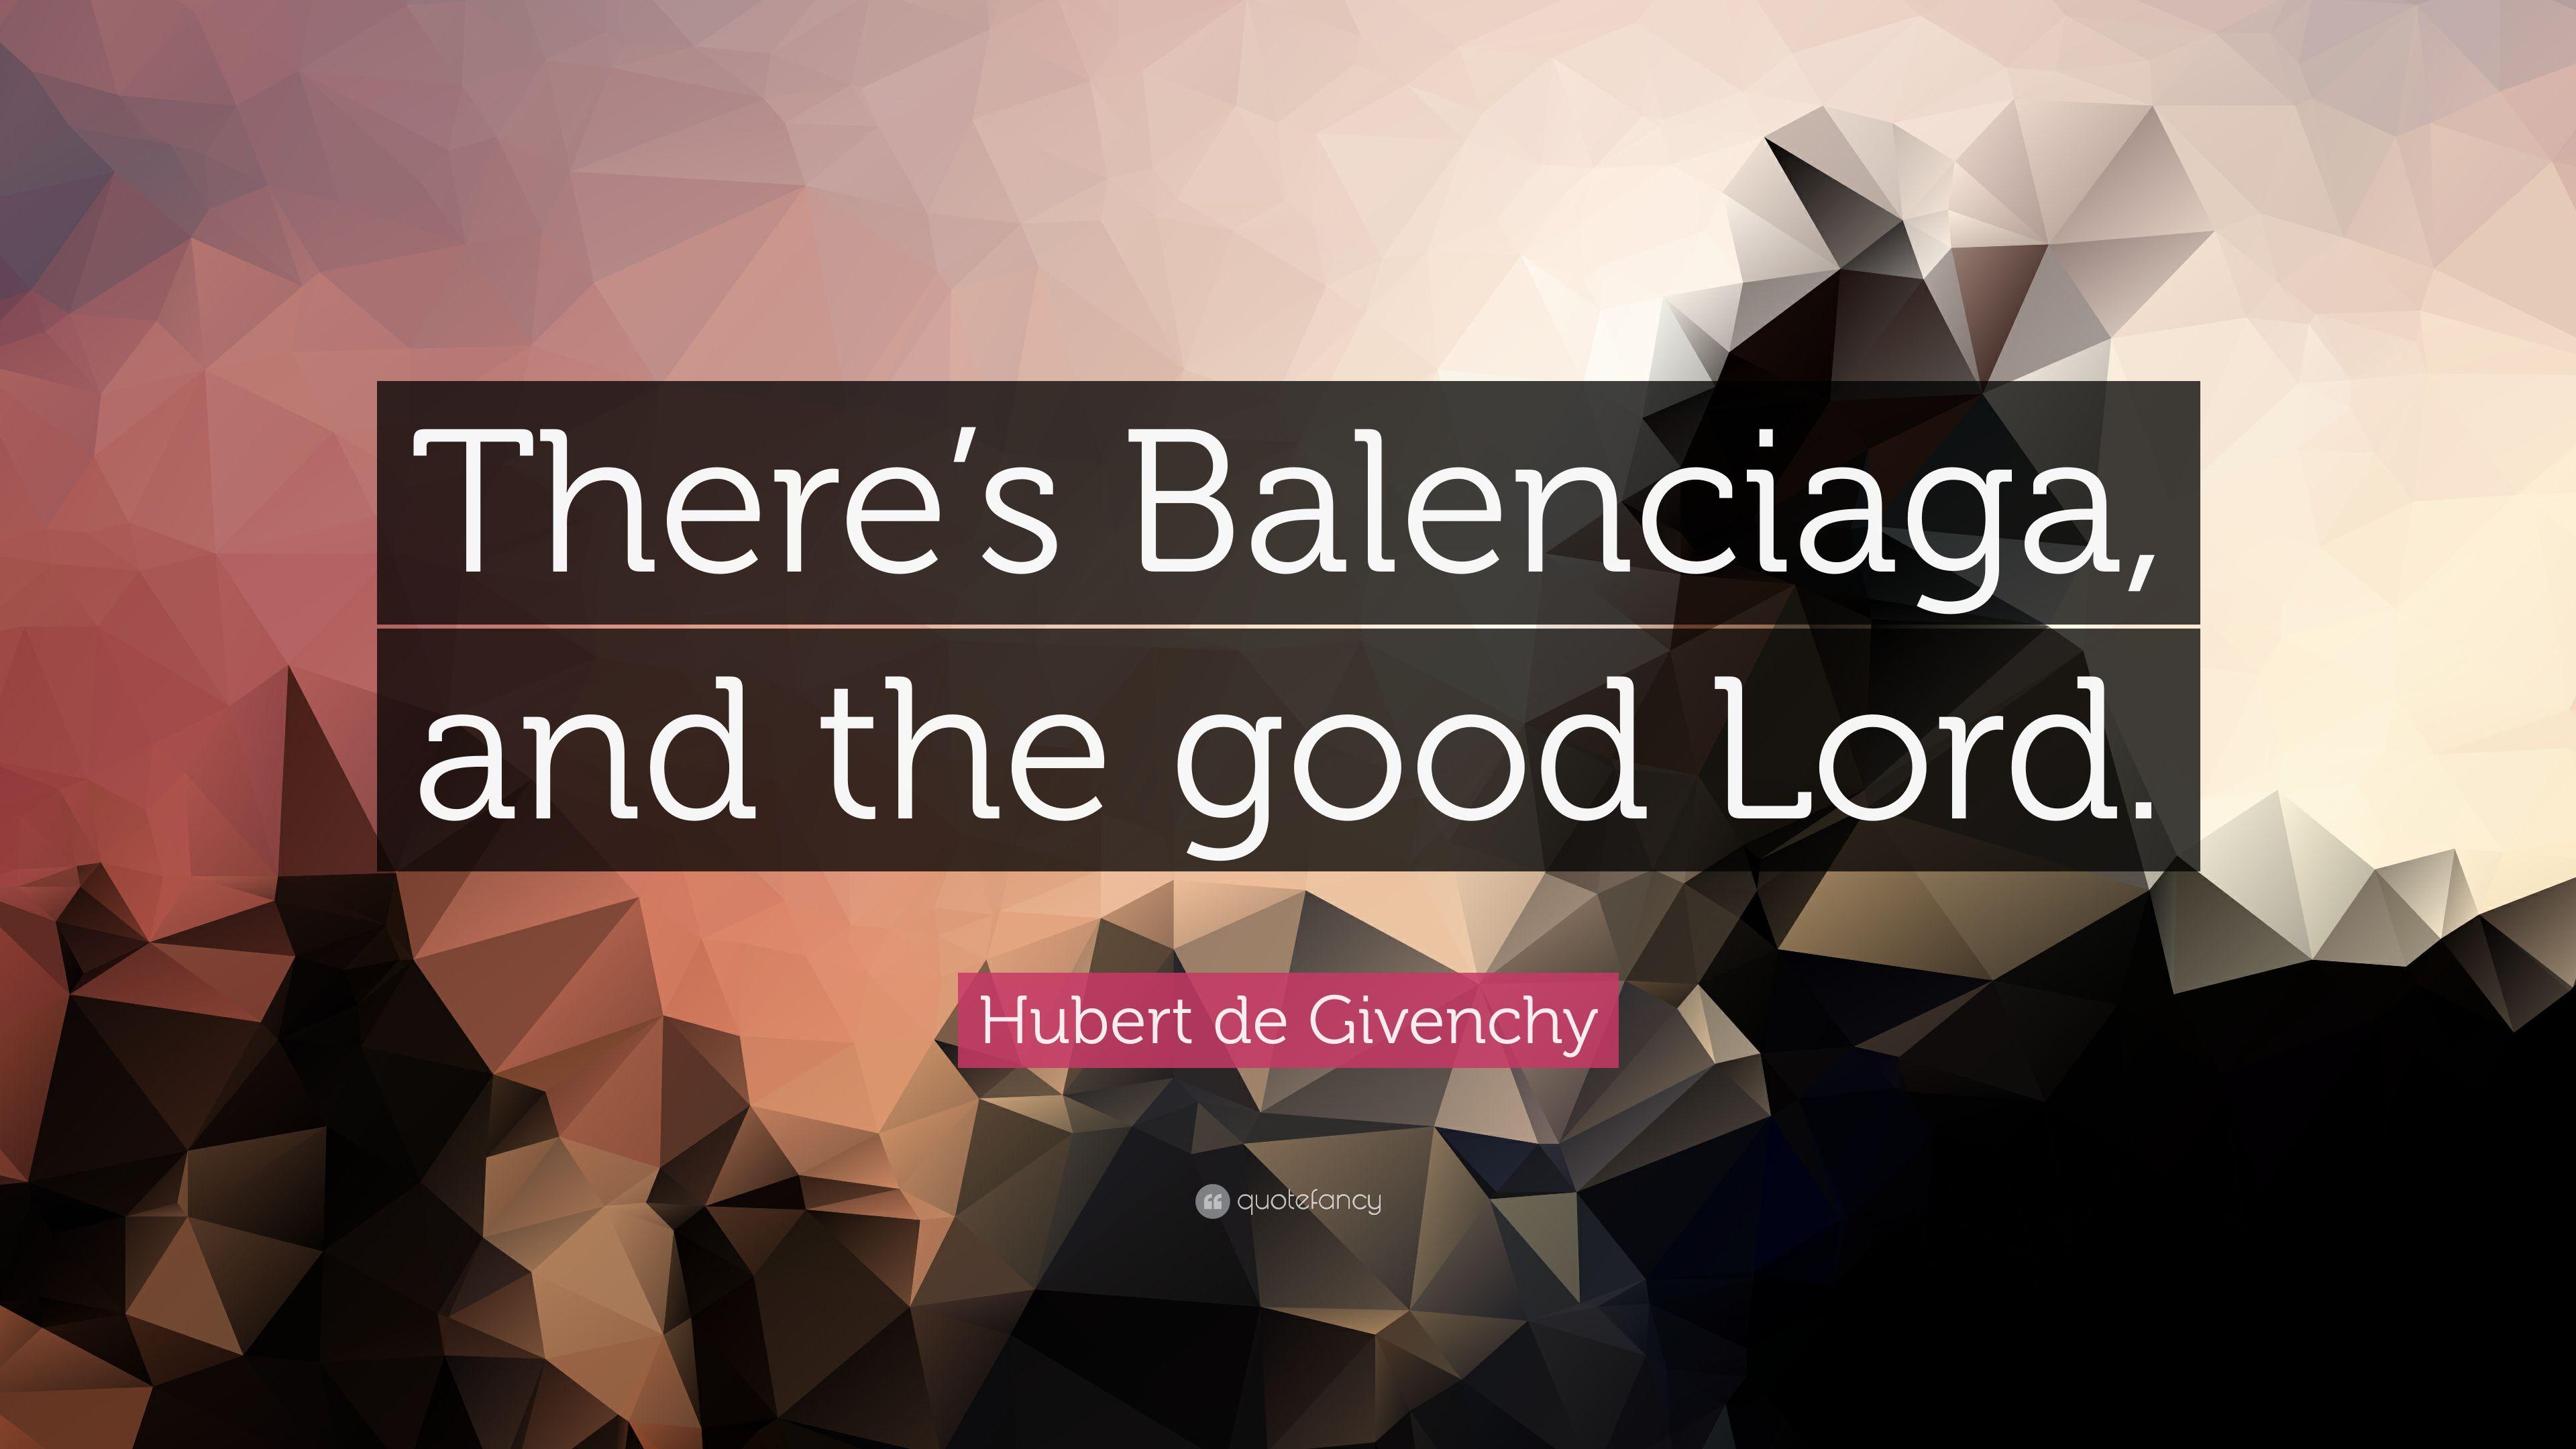 Hubert de Givenchy Quote: “There's Balenciaga, and the good Lord